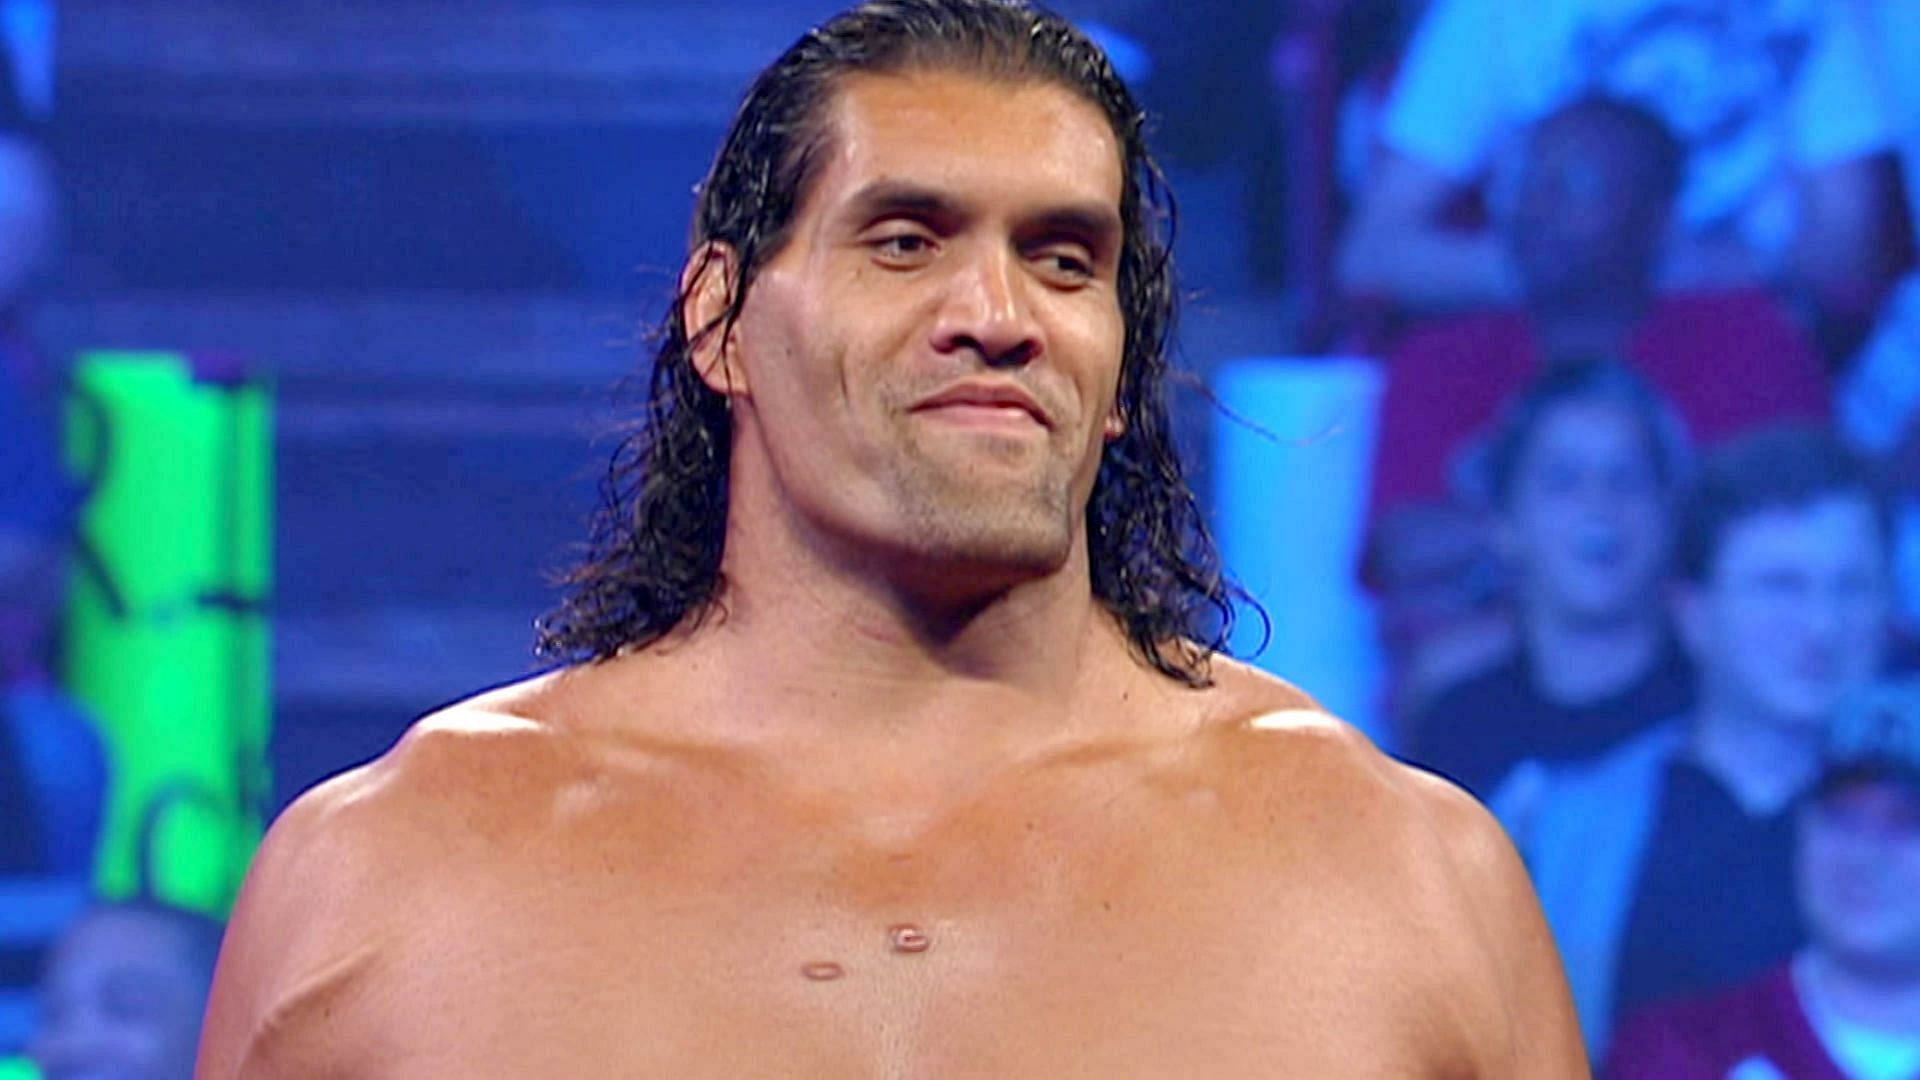 Khali claims the WWE Superstar wept after the backstage fight